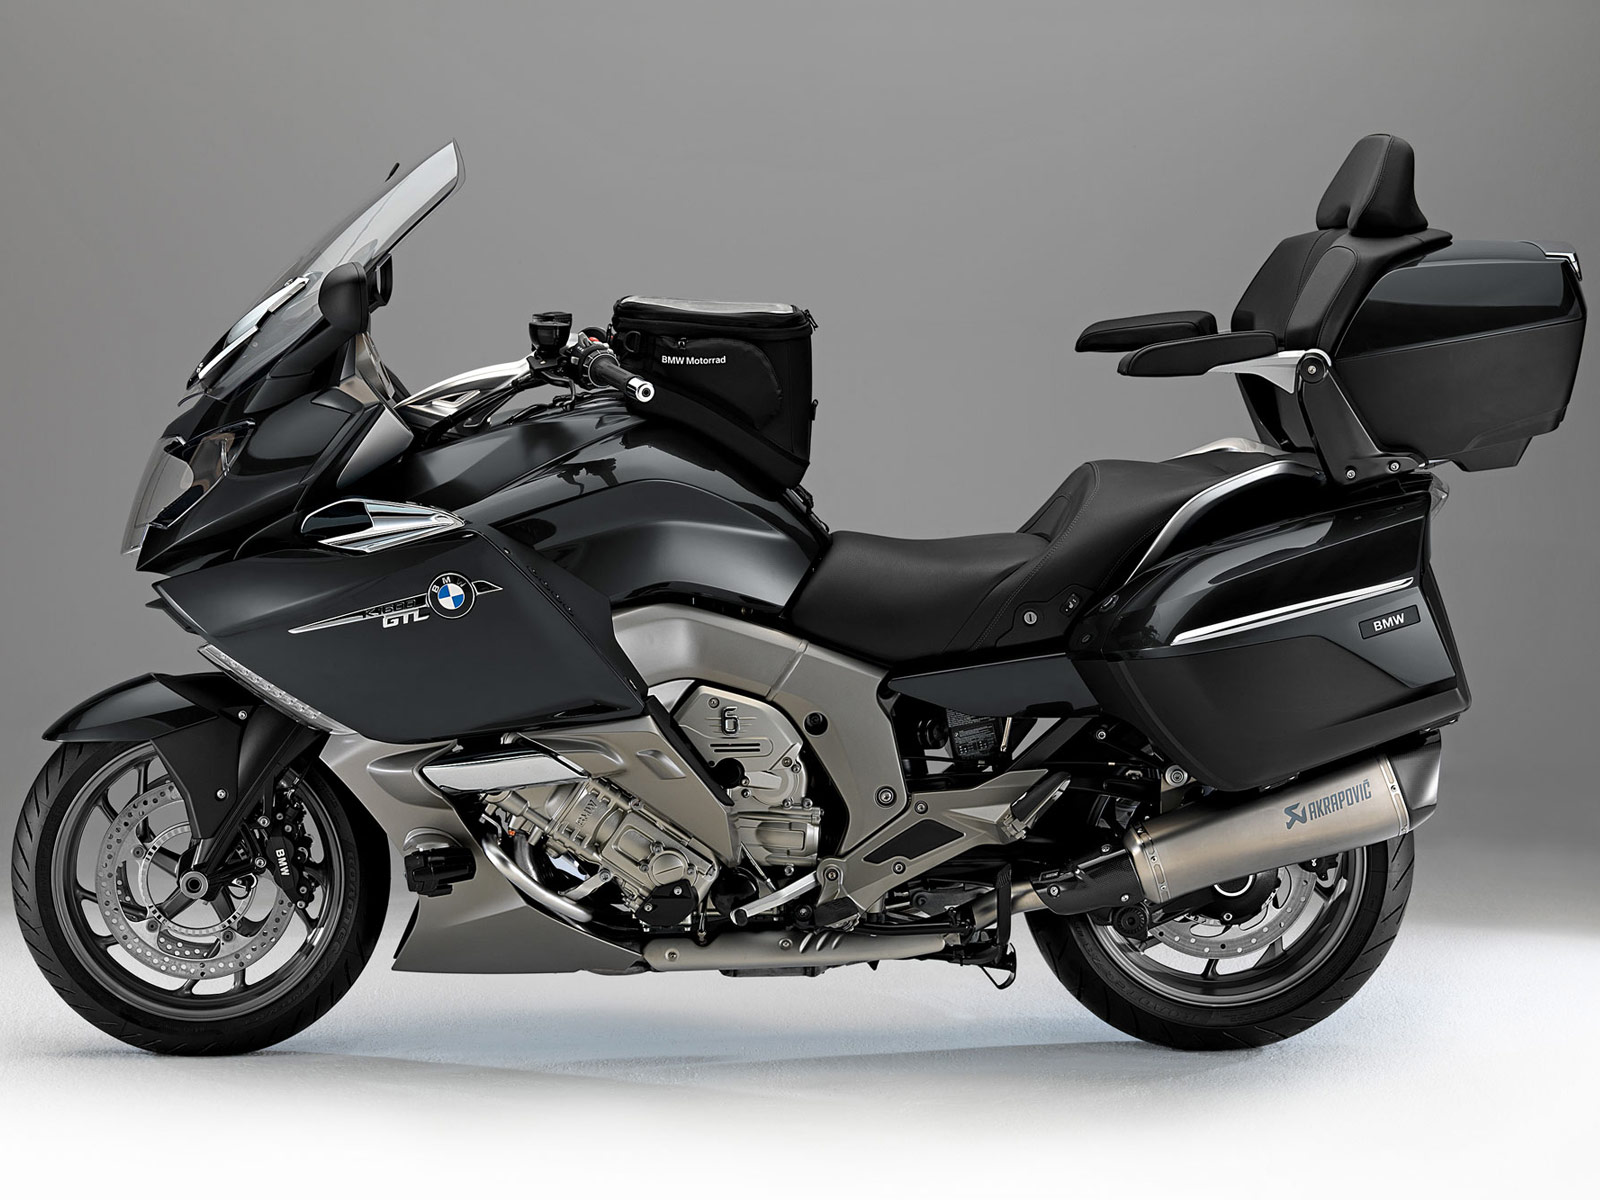 2013 Motorcycle Insurance BMW K1600GTL Information, pictures, specs